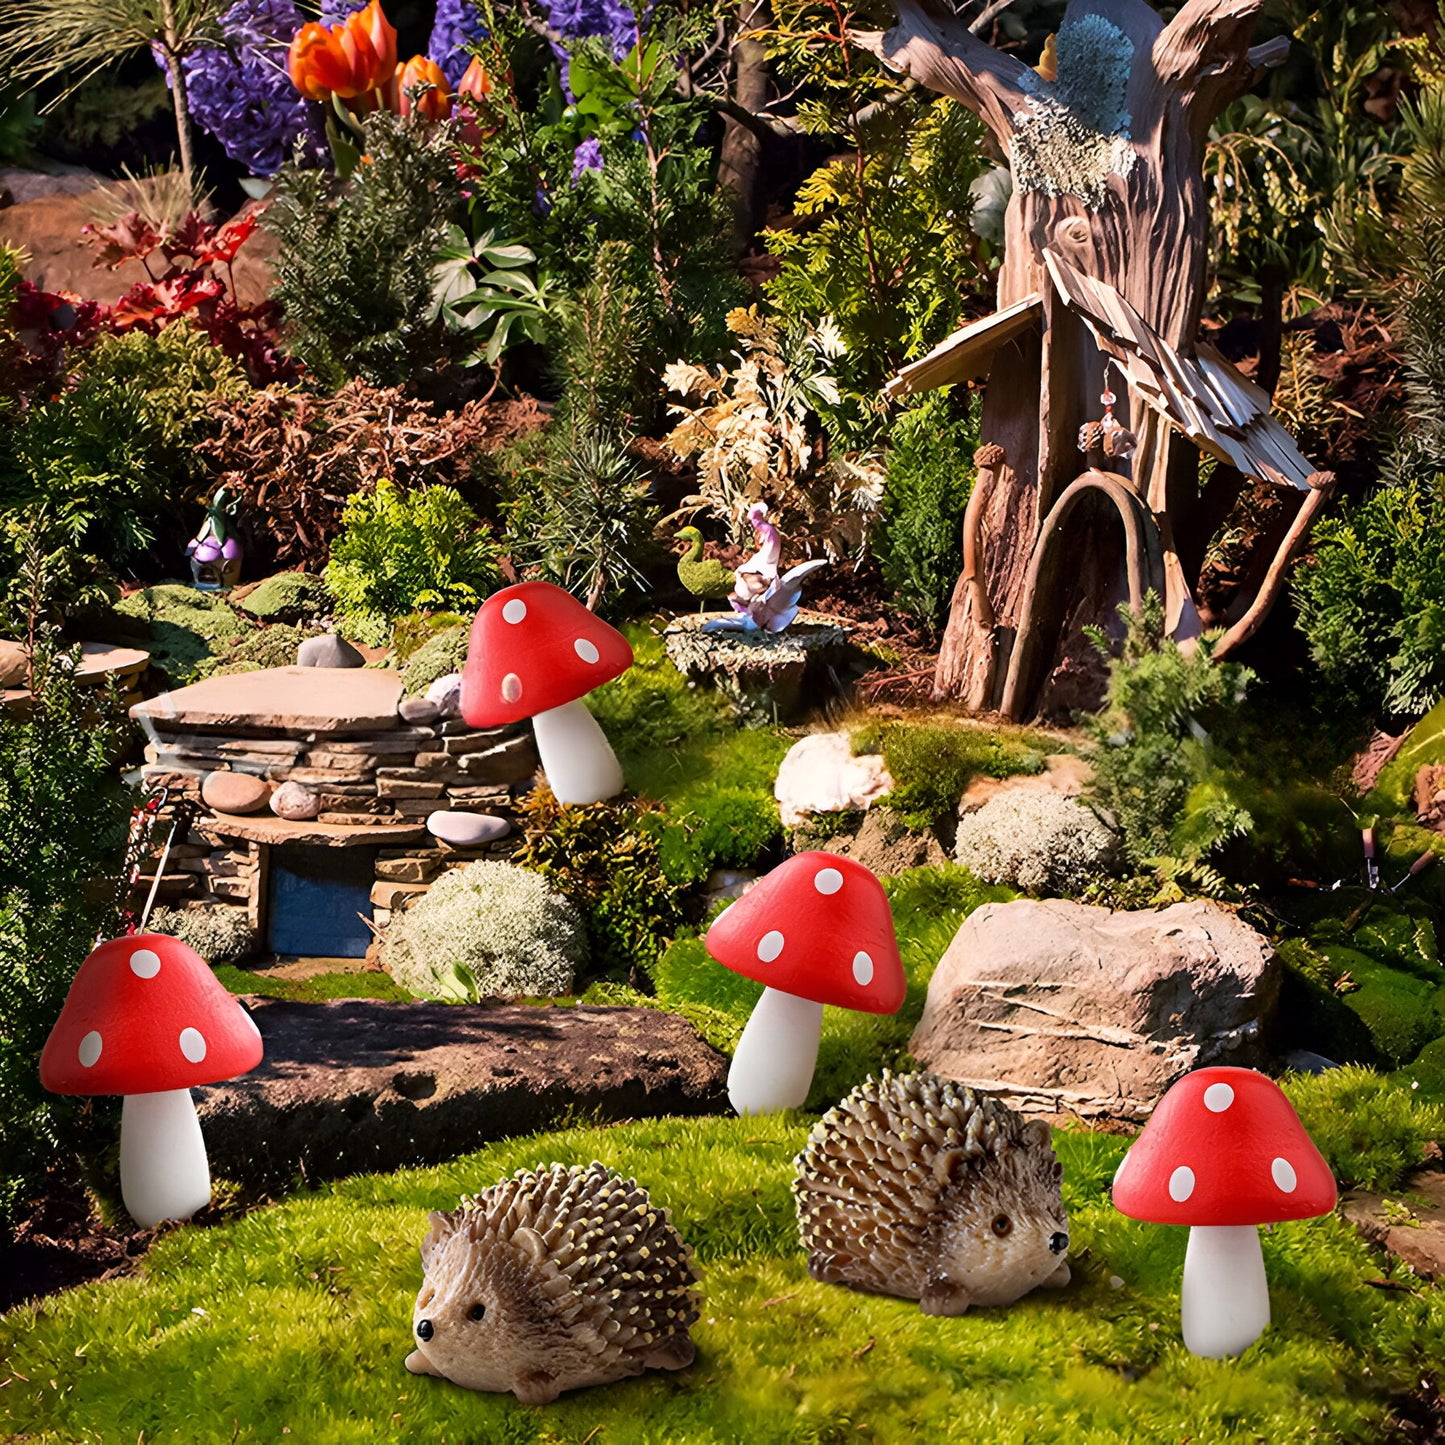 Resin Hedgehog and Wooden Mushroom Ornaments Set of 6, Miniature Garden Accessories for Fairy Garden, Pottery Scenery, Yard, Fairy Tale Garden, Lawn Décor